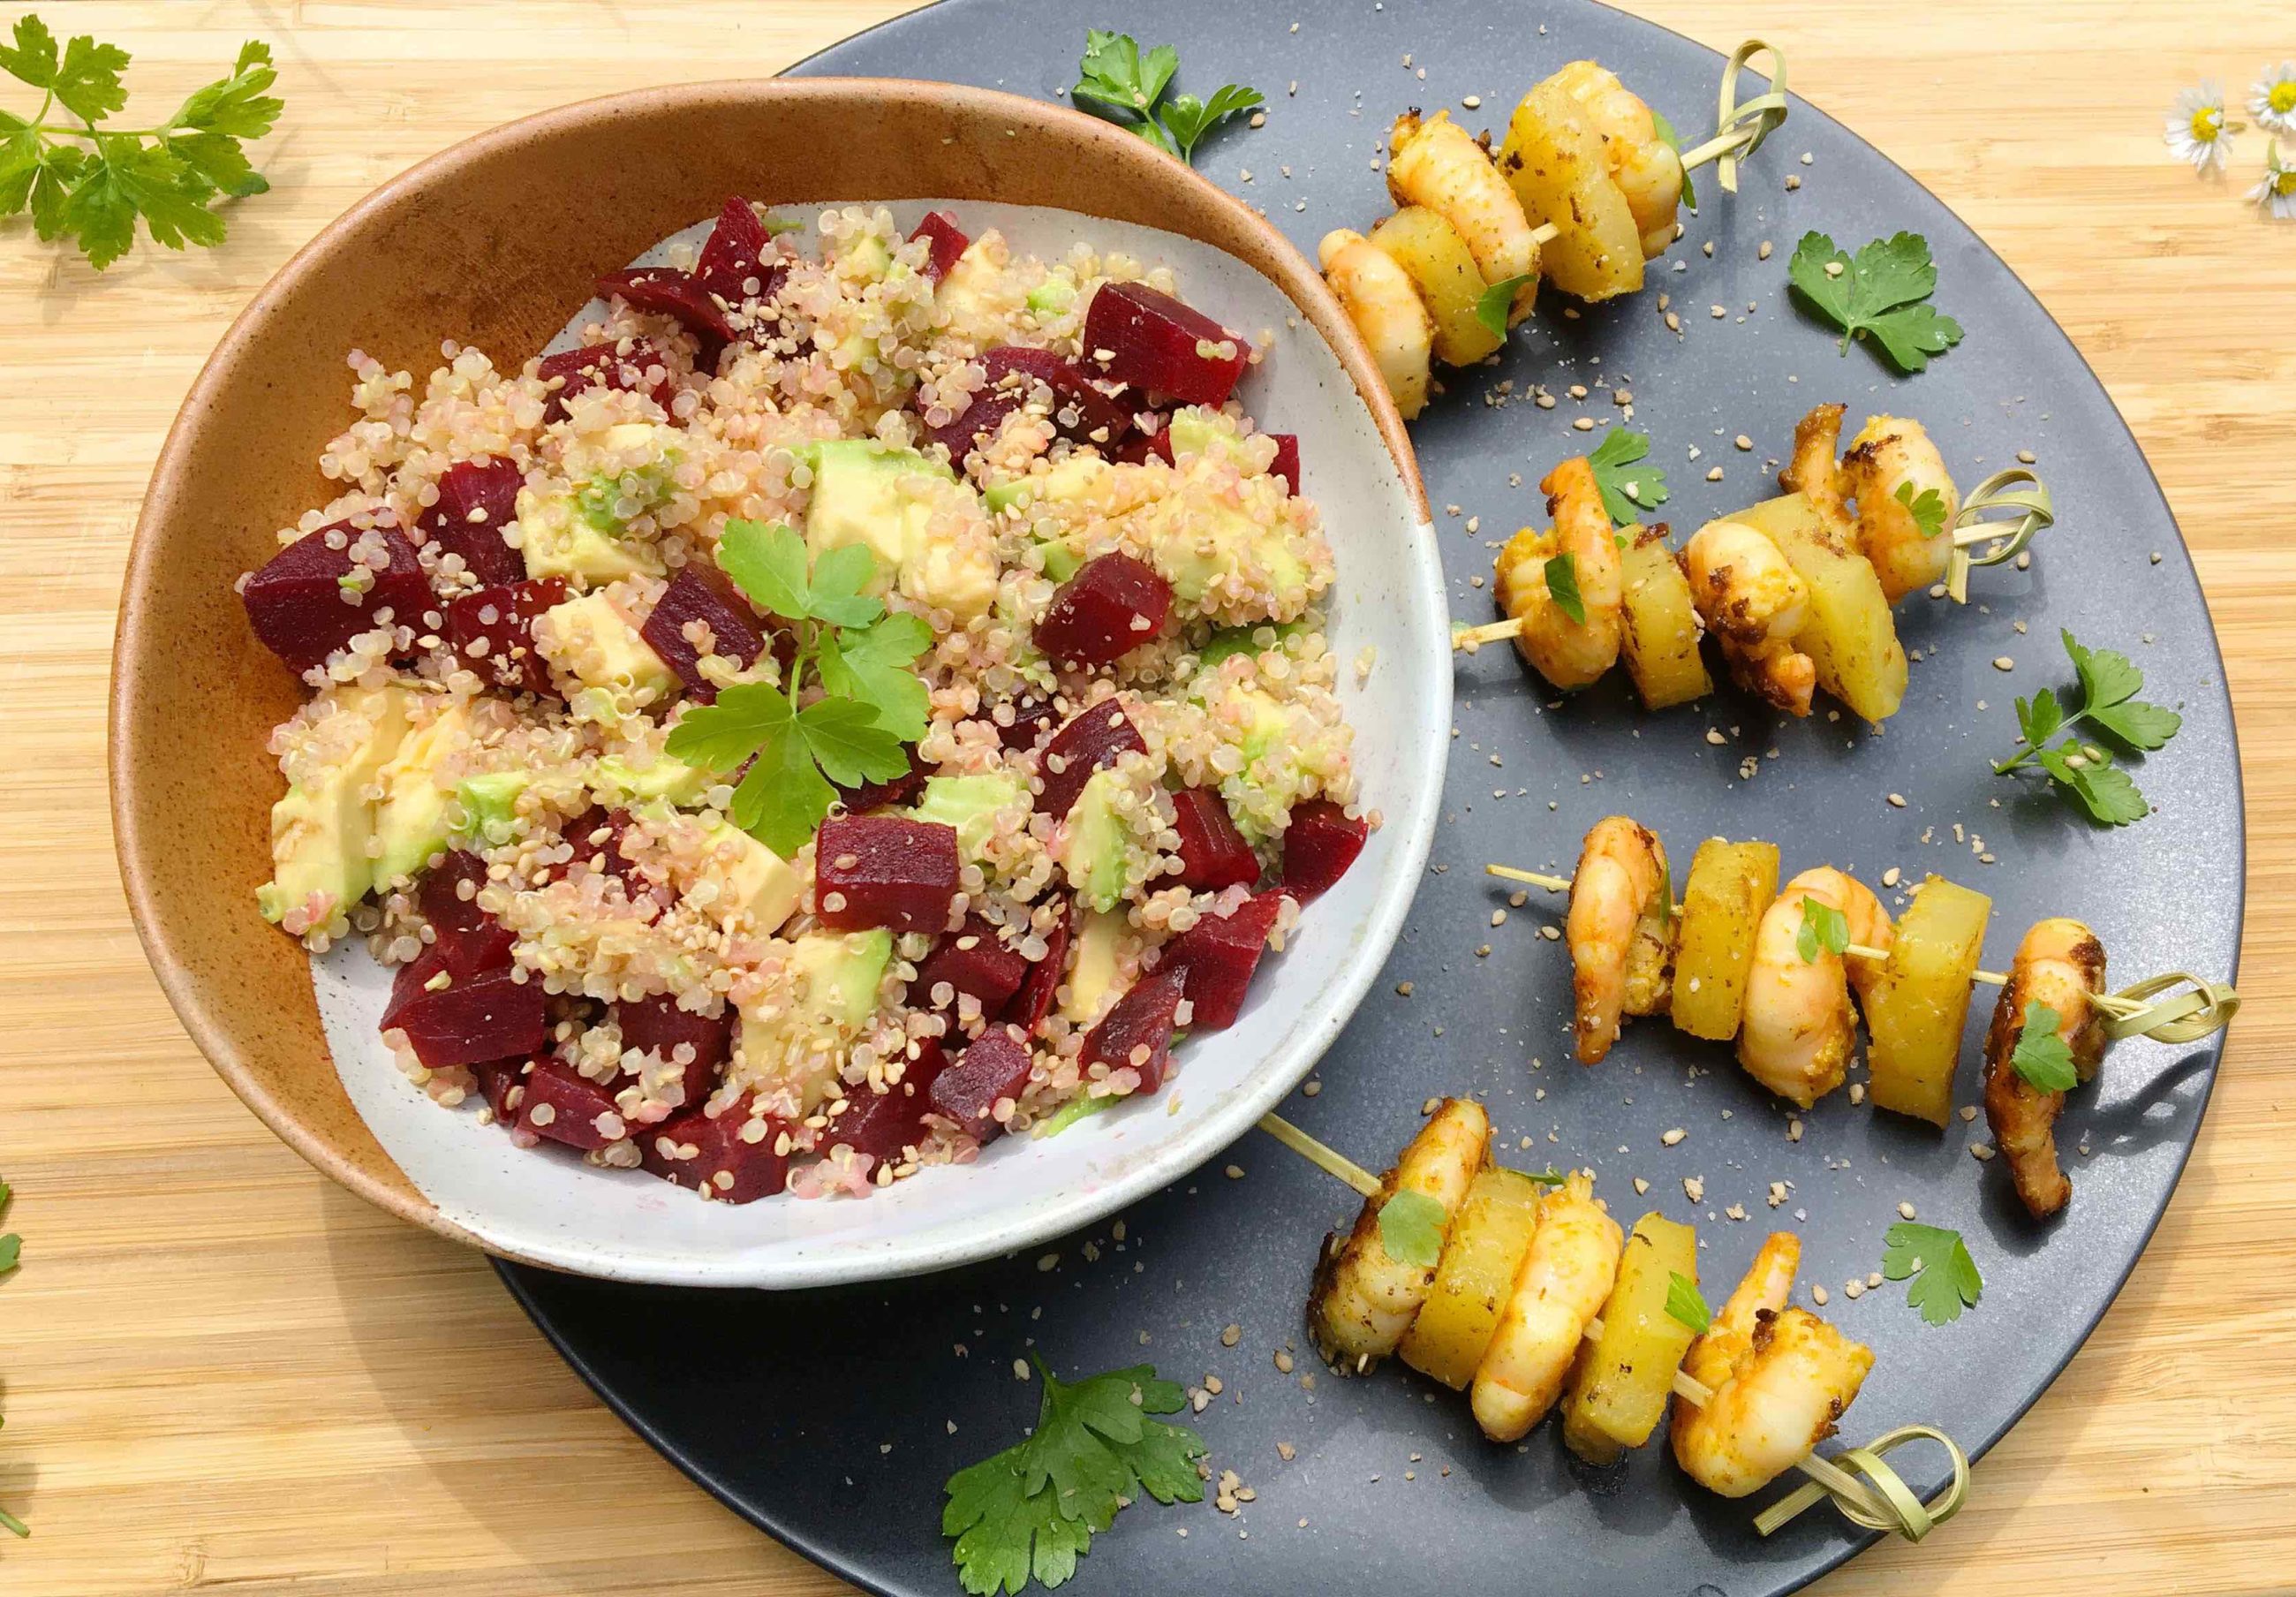 Shrimp and pineapple skewers with quinoa salad